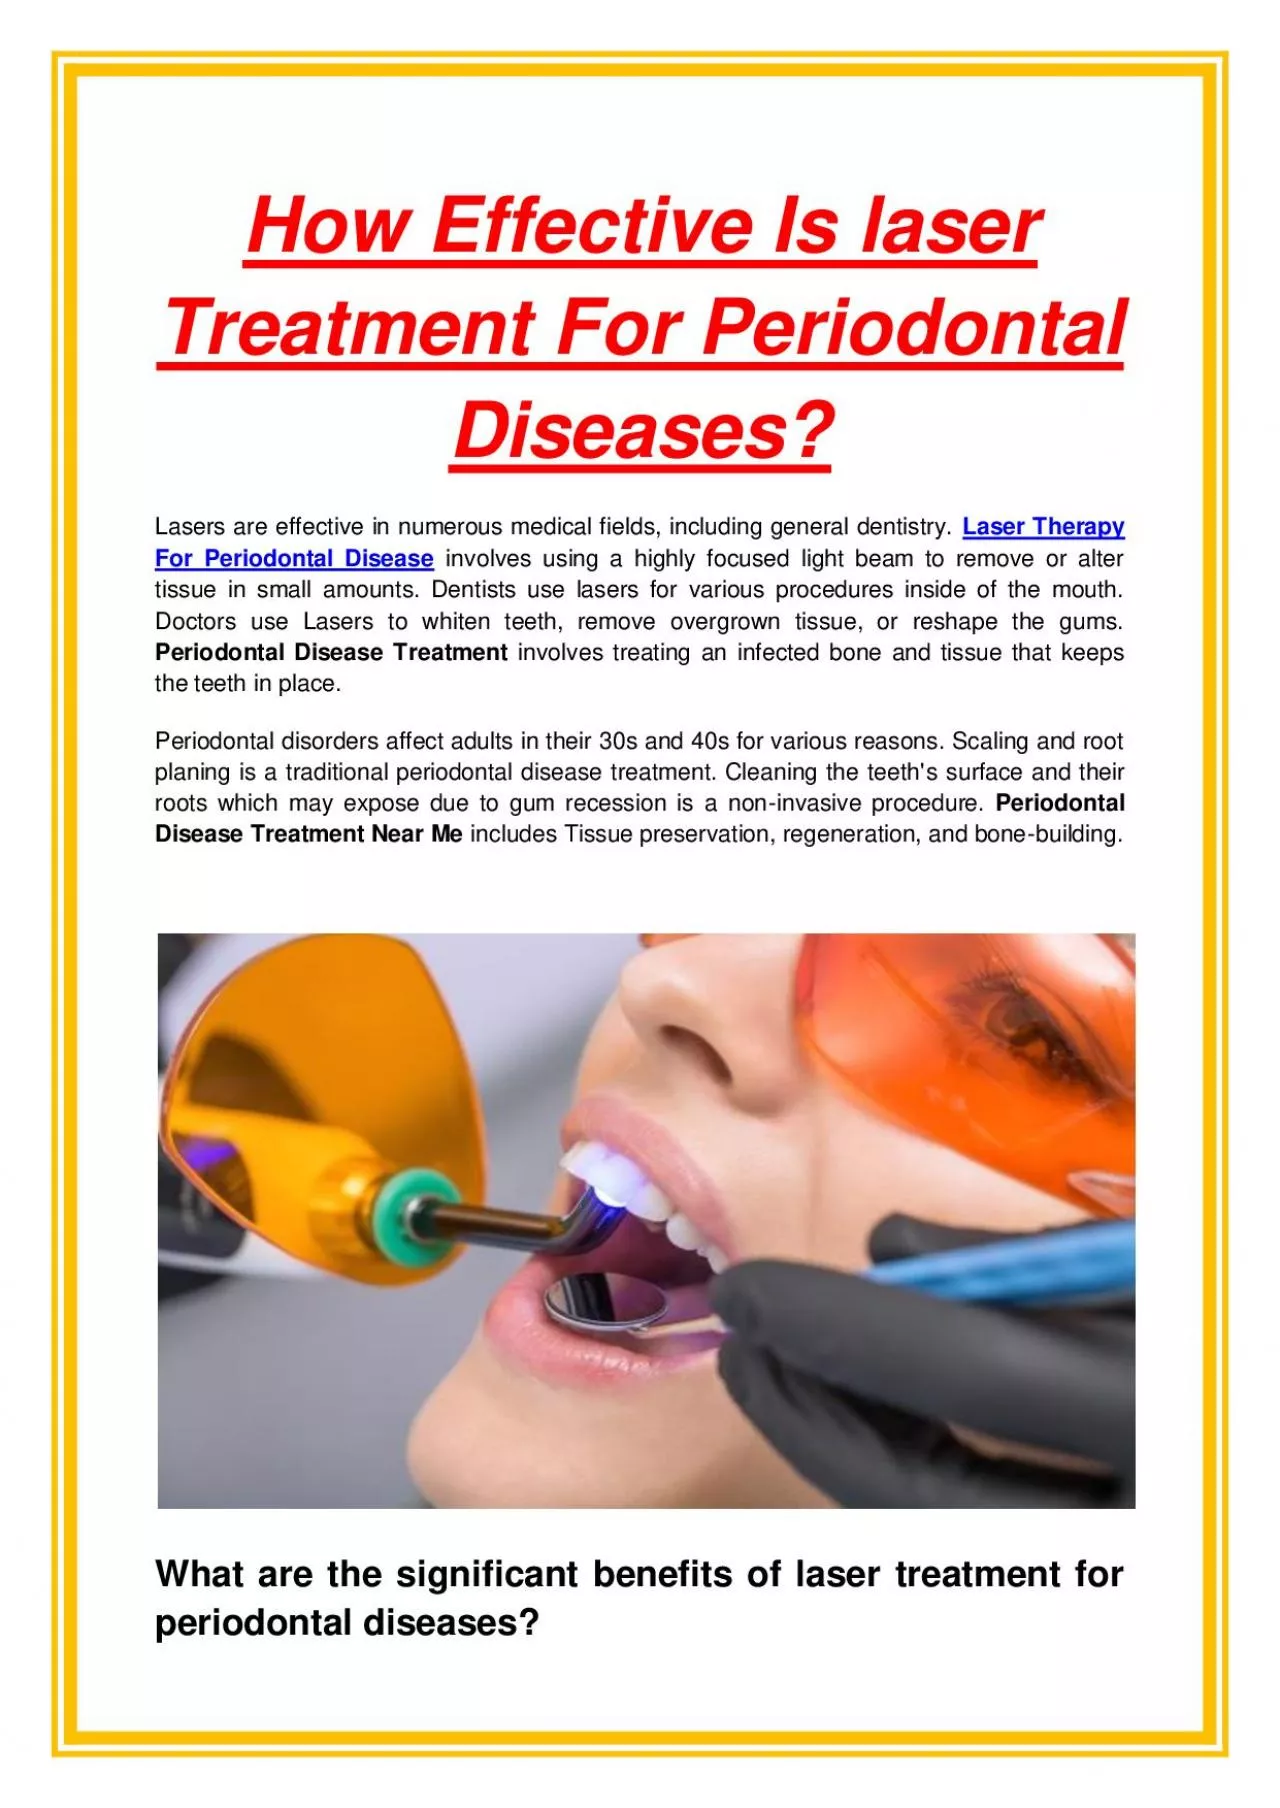 How Effective Is laser Treatment For Periodontal Diseases?